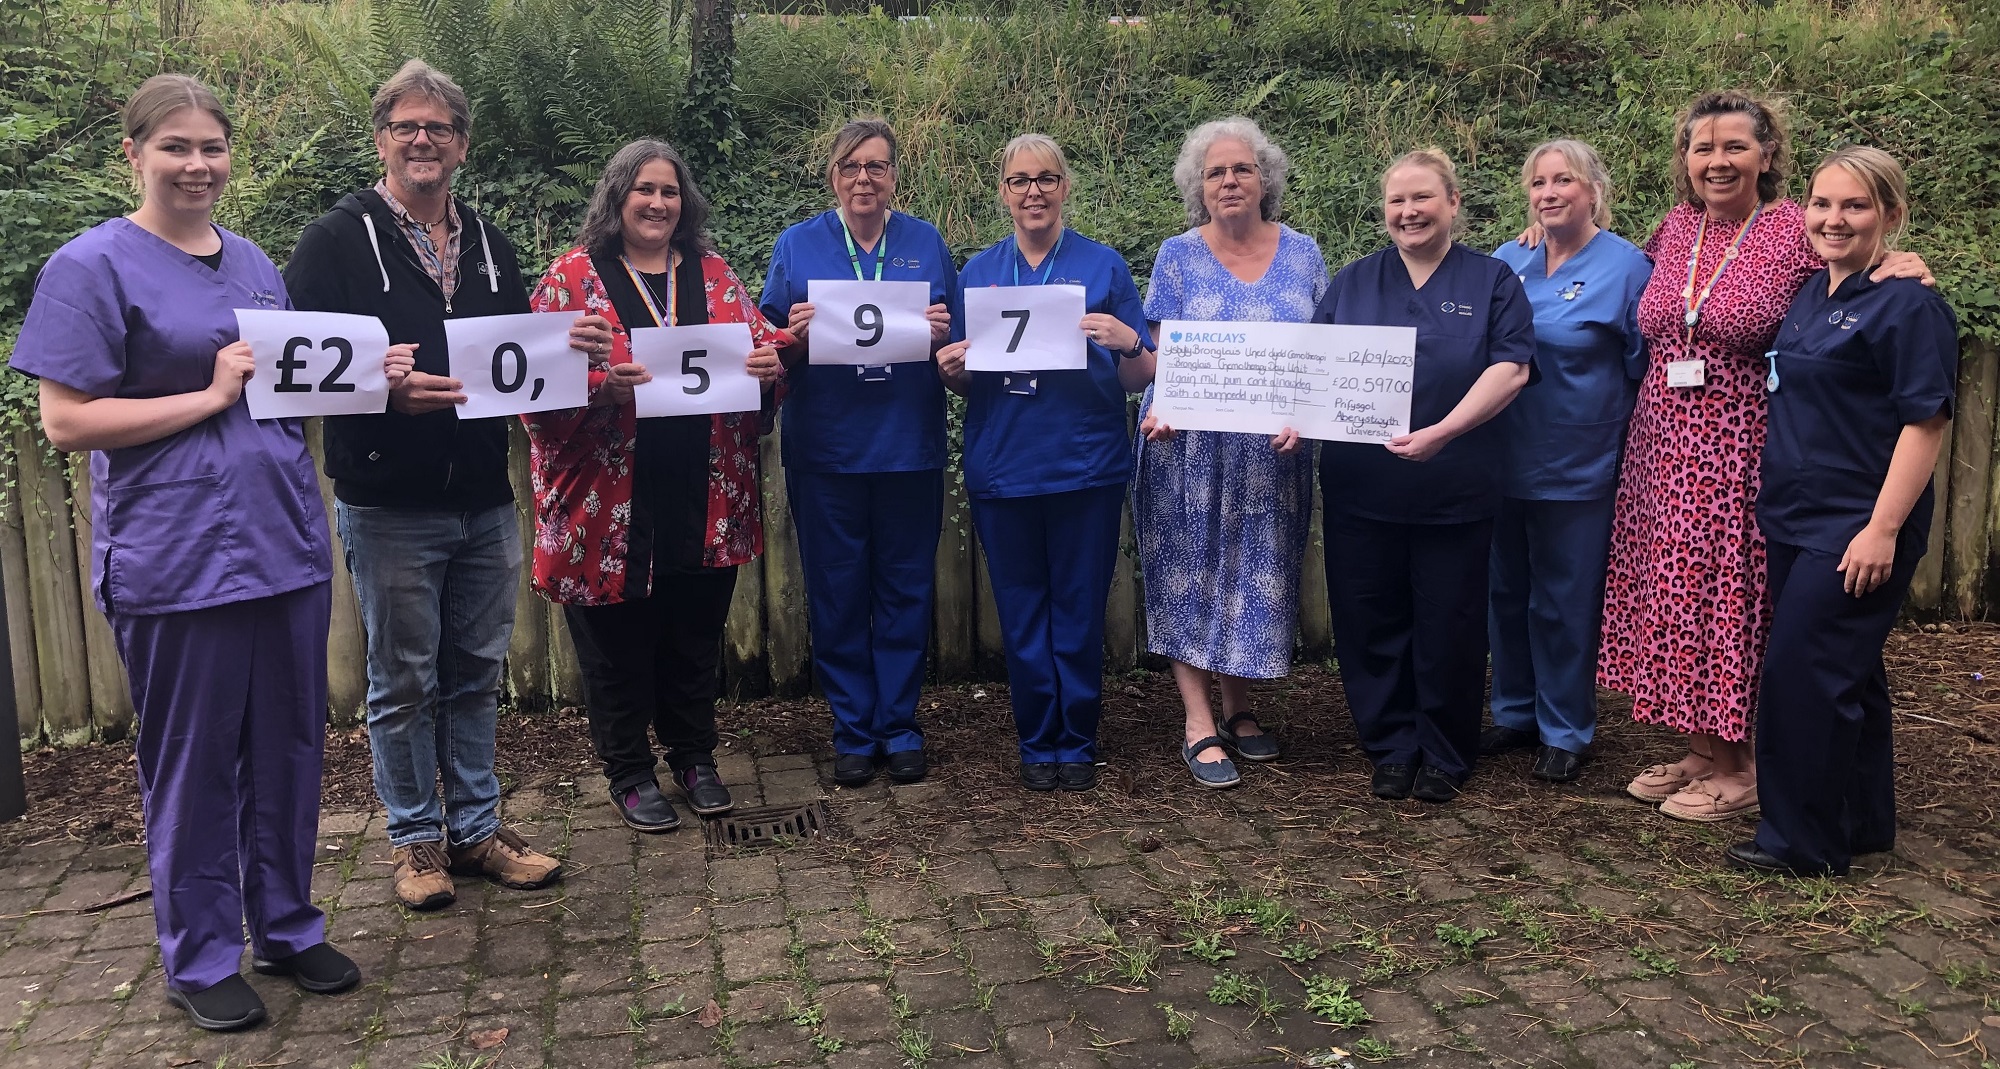 Aberystwyth University Vice-Chancellor, Professor Elizabeth Treasure, along with staff and students from the University, present a cheque for £20,597 to Bronglais Chemotherapy Day Unit